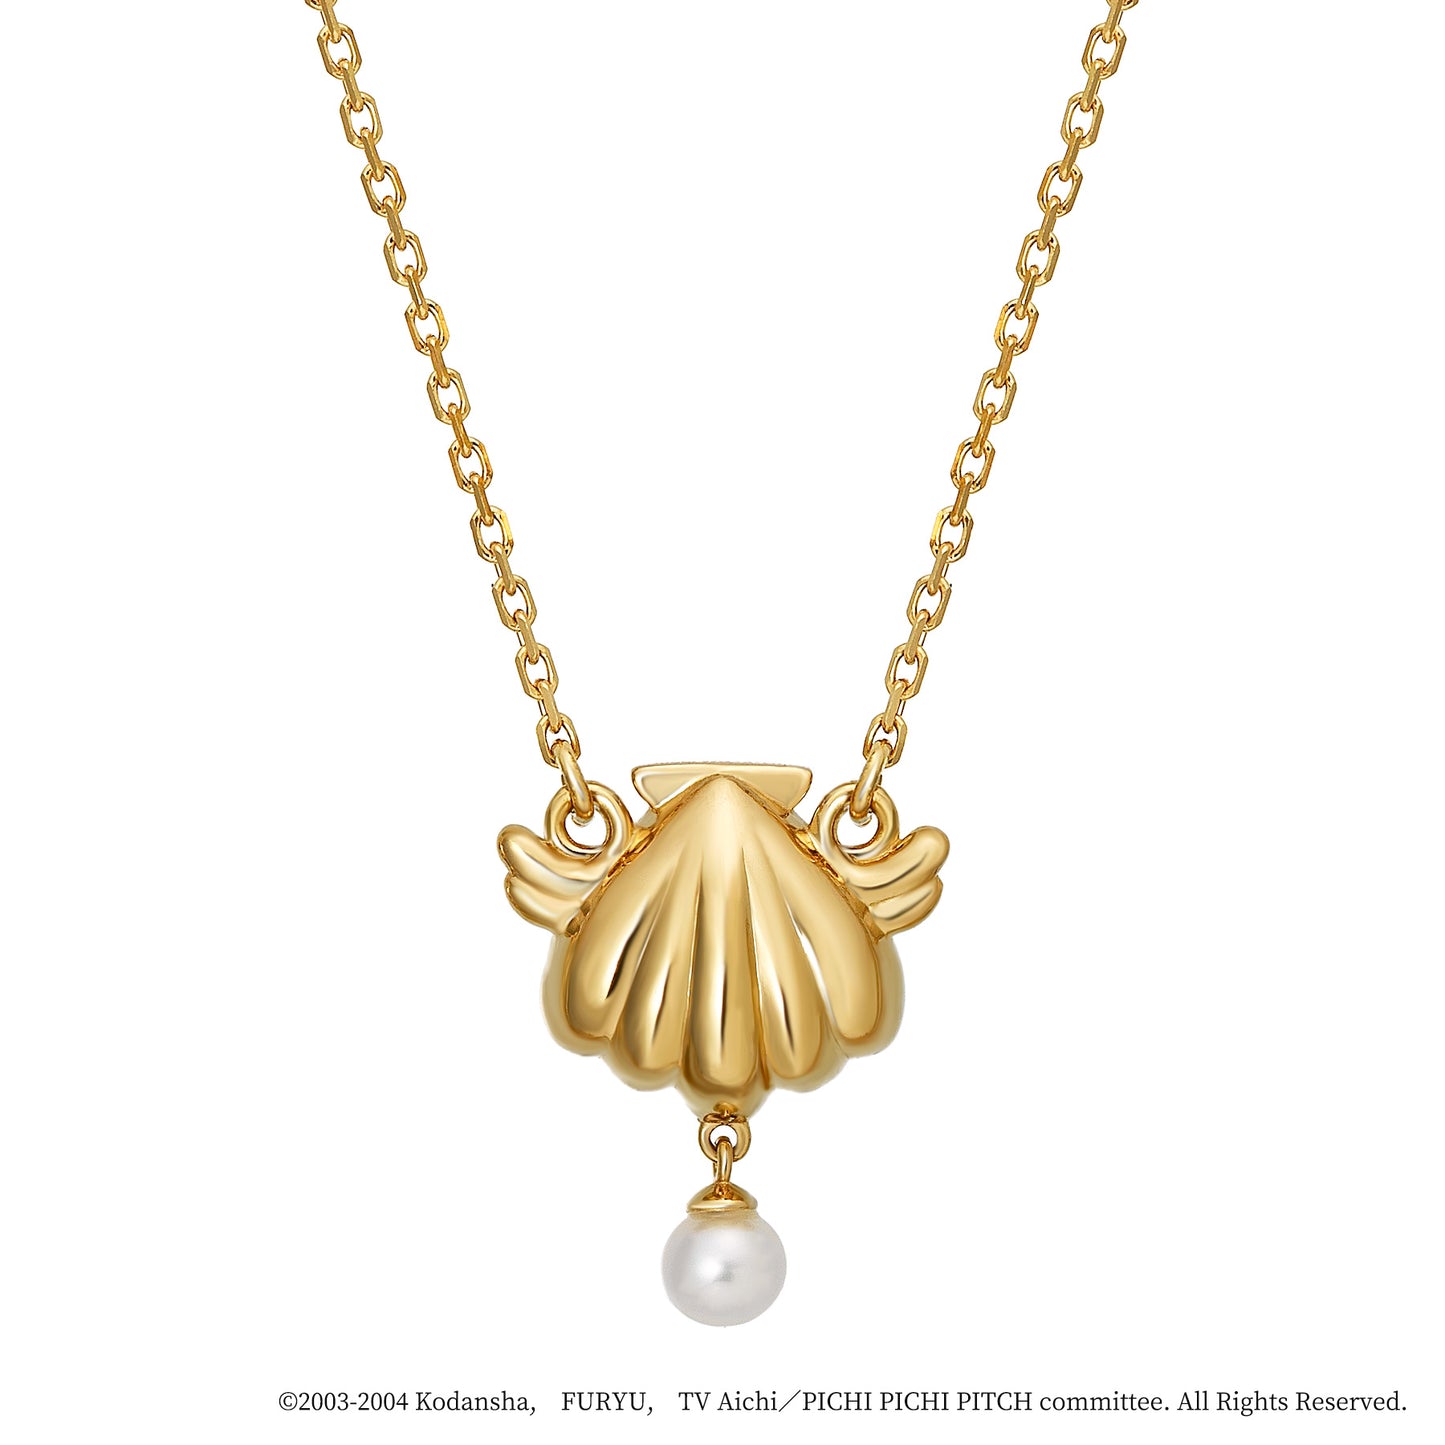 Mermaid Melody Pichi Pichi Pitch - Reversible Necklace (Coco) - Product Image